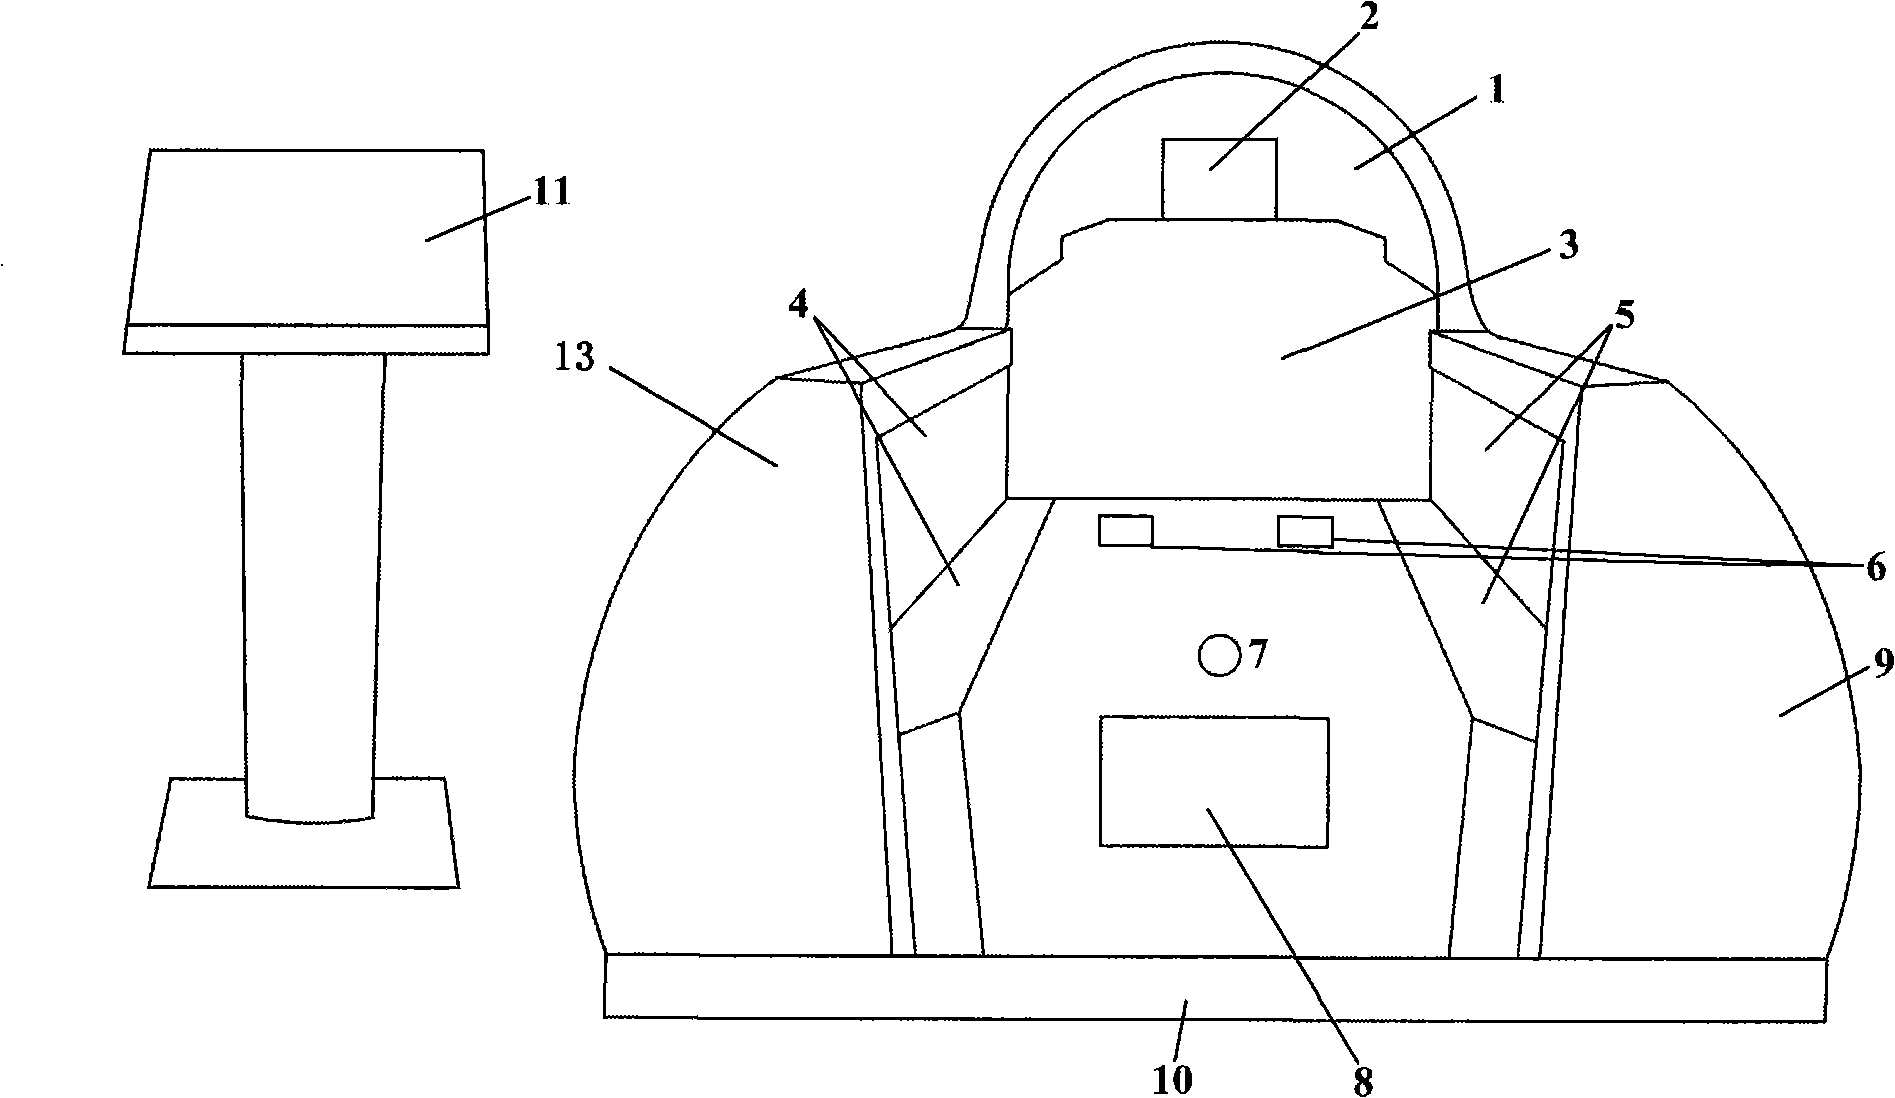 Control apparatus for airplane synthetic guarantee simulated training system